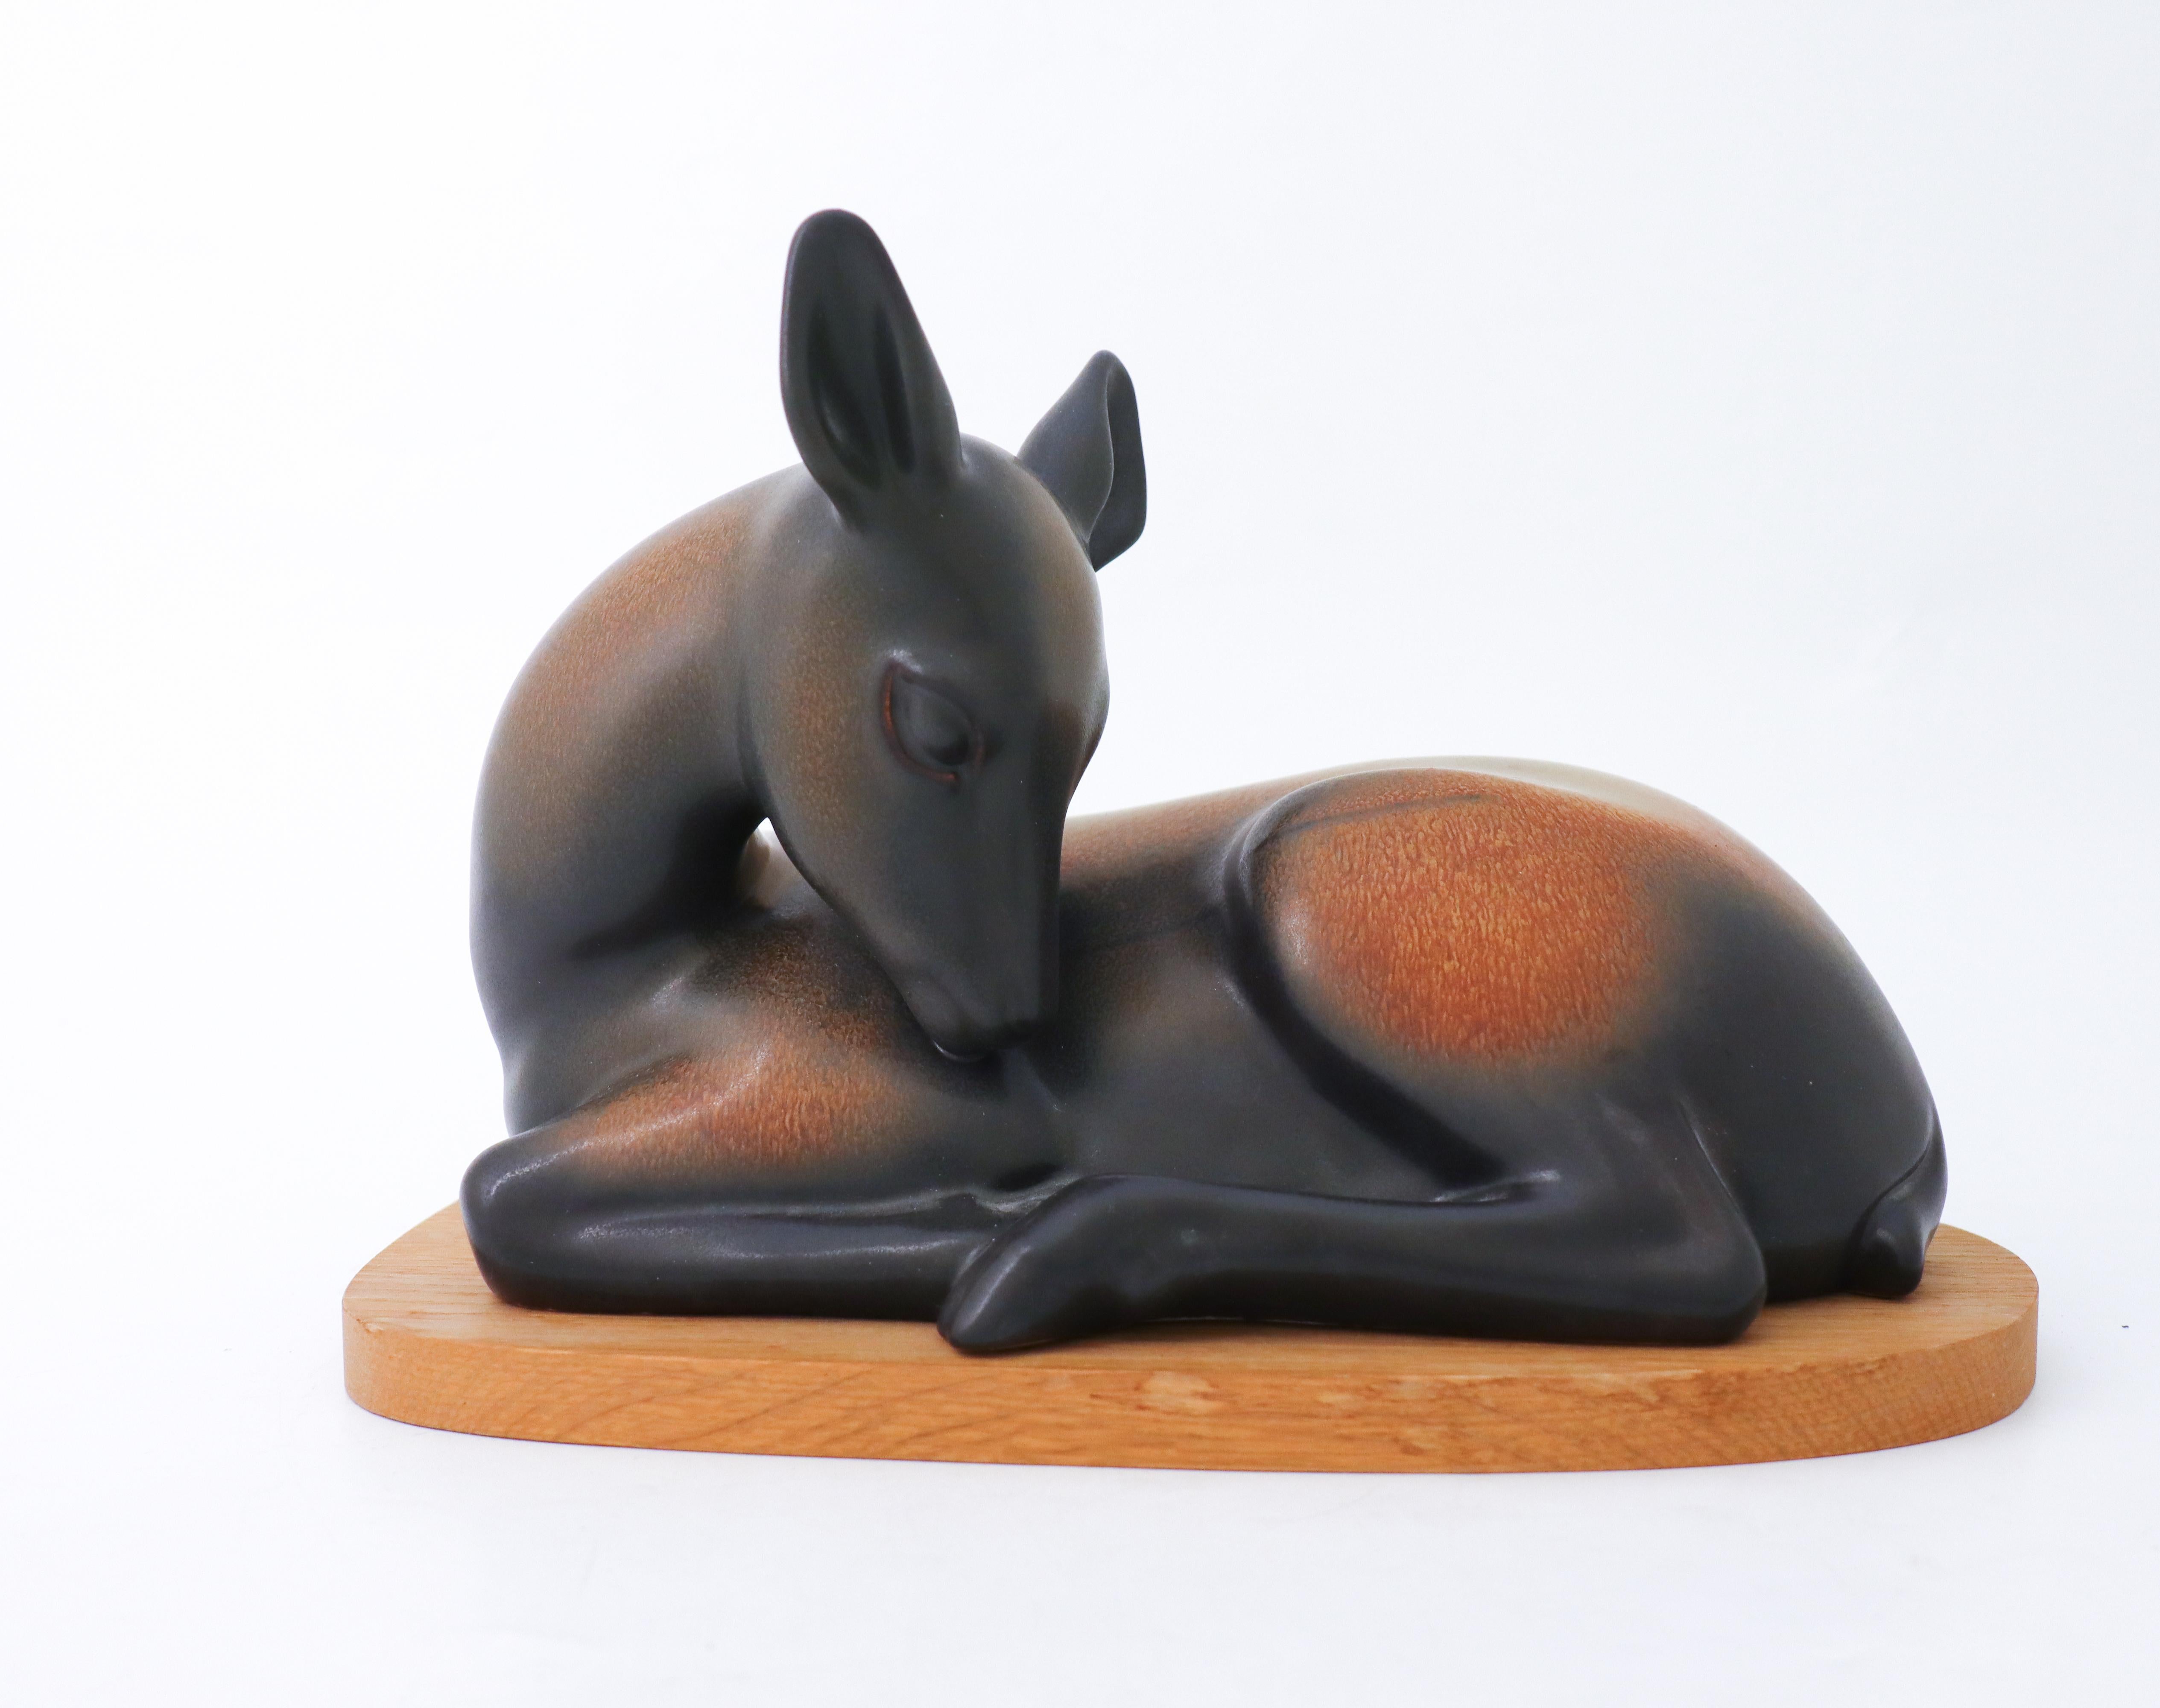 A sculpture of a deer in ceramic designed by Gunnar Nylund at Rörstrand. It is 27,5 x 16.5 cm (11